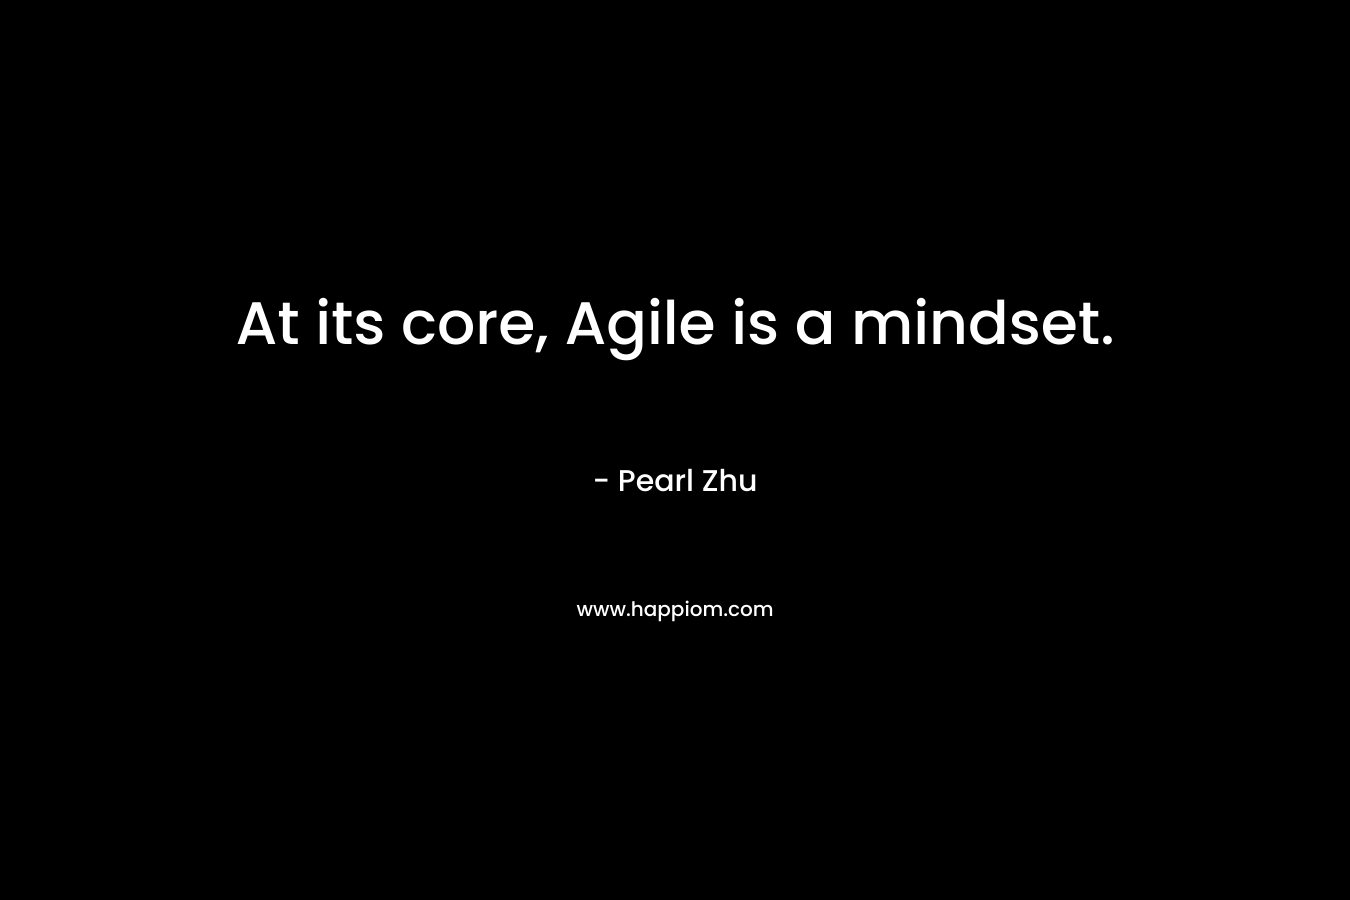 At its core, Agile is a mindset. – Pearl Zhu